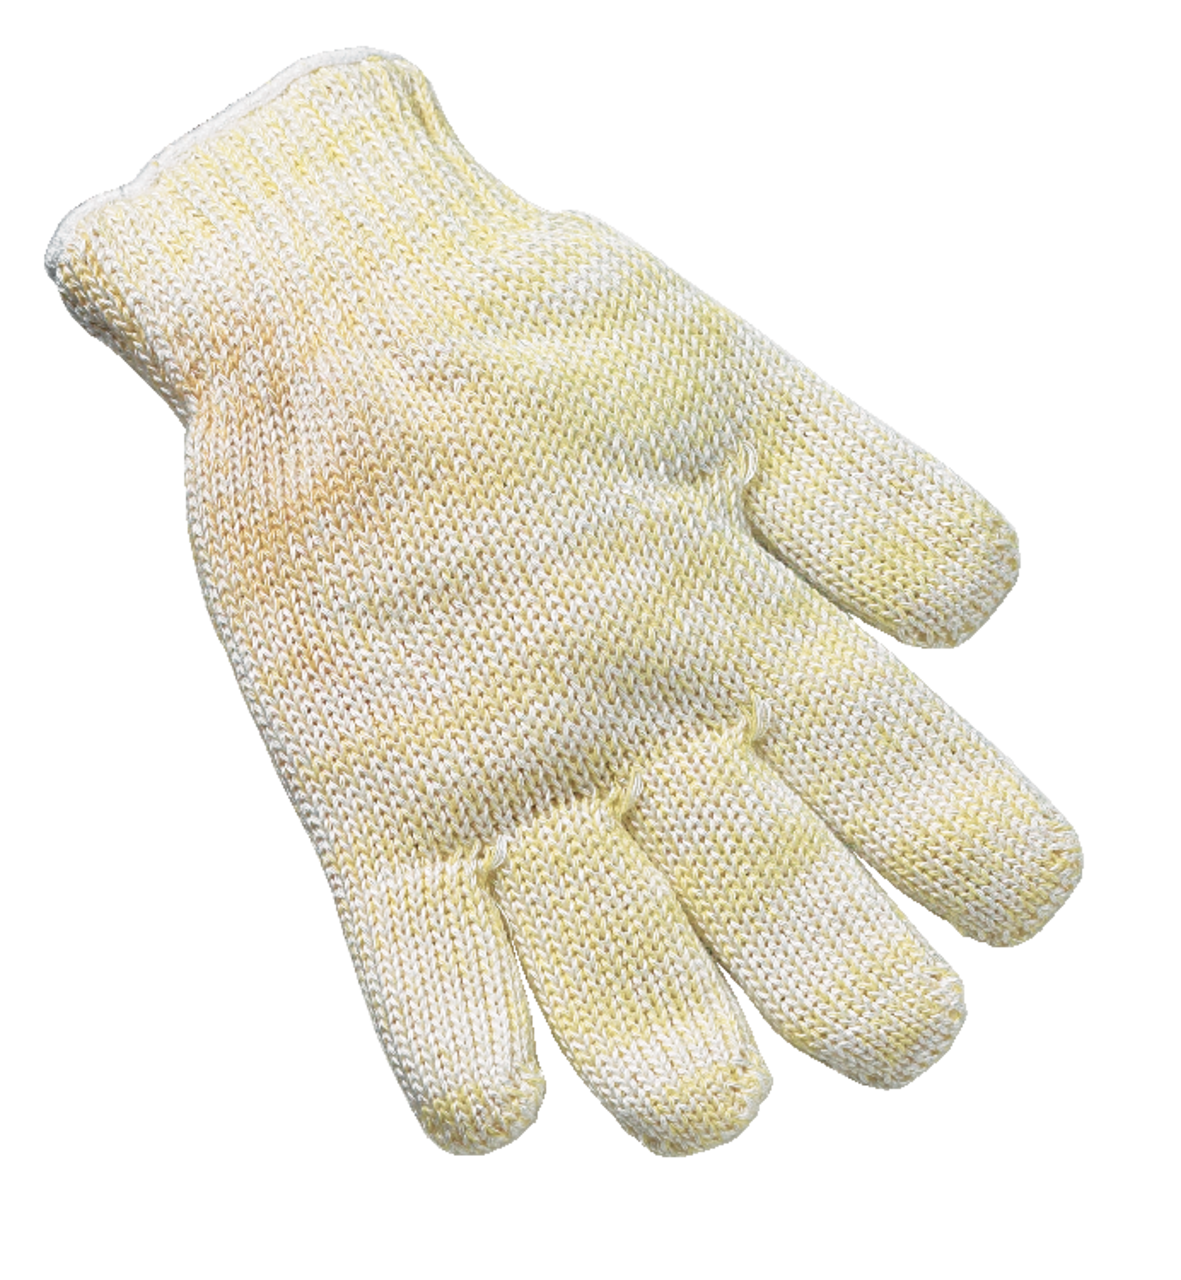 Ove Glove 2 Pack Oven Mitts, Superior Hand Protection, Anti-Slip Glove -  NEW